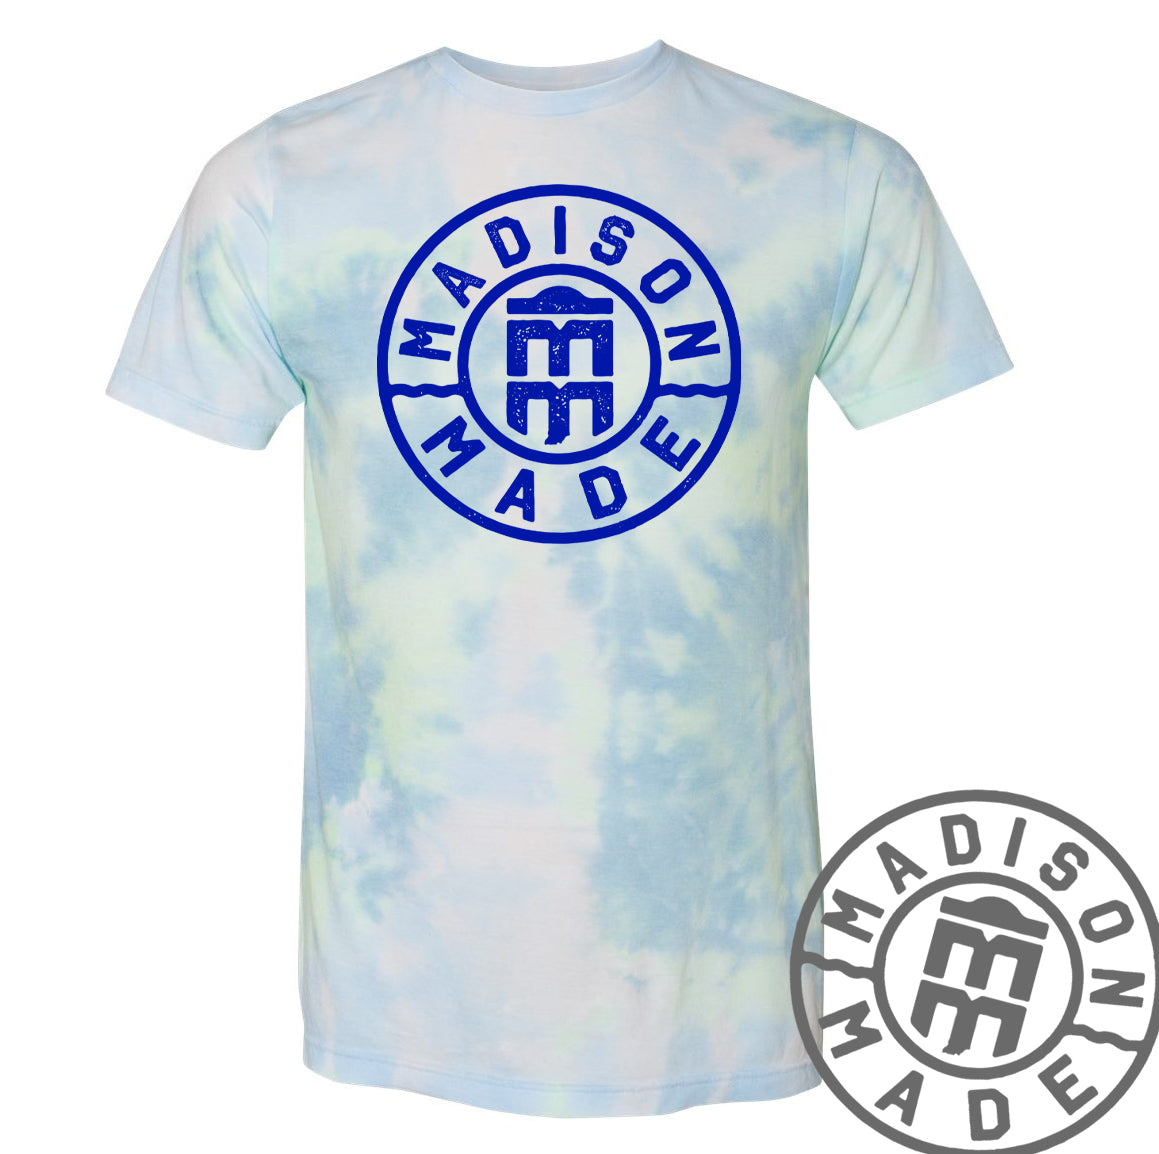 Madison Made Tie-Dyed Tee